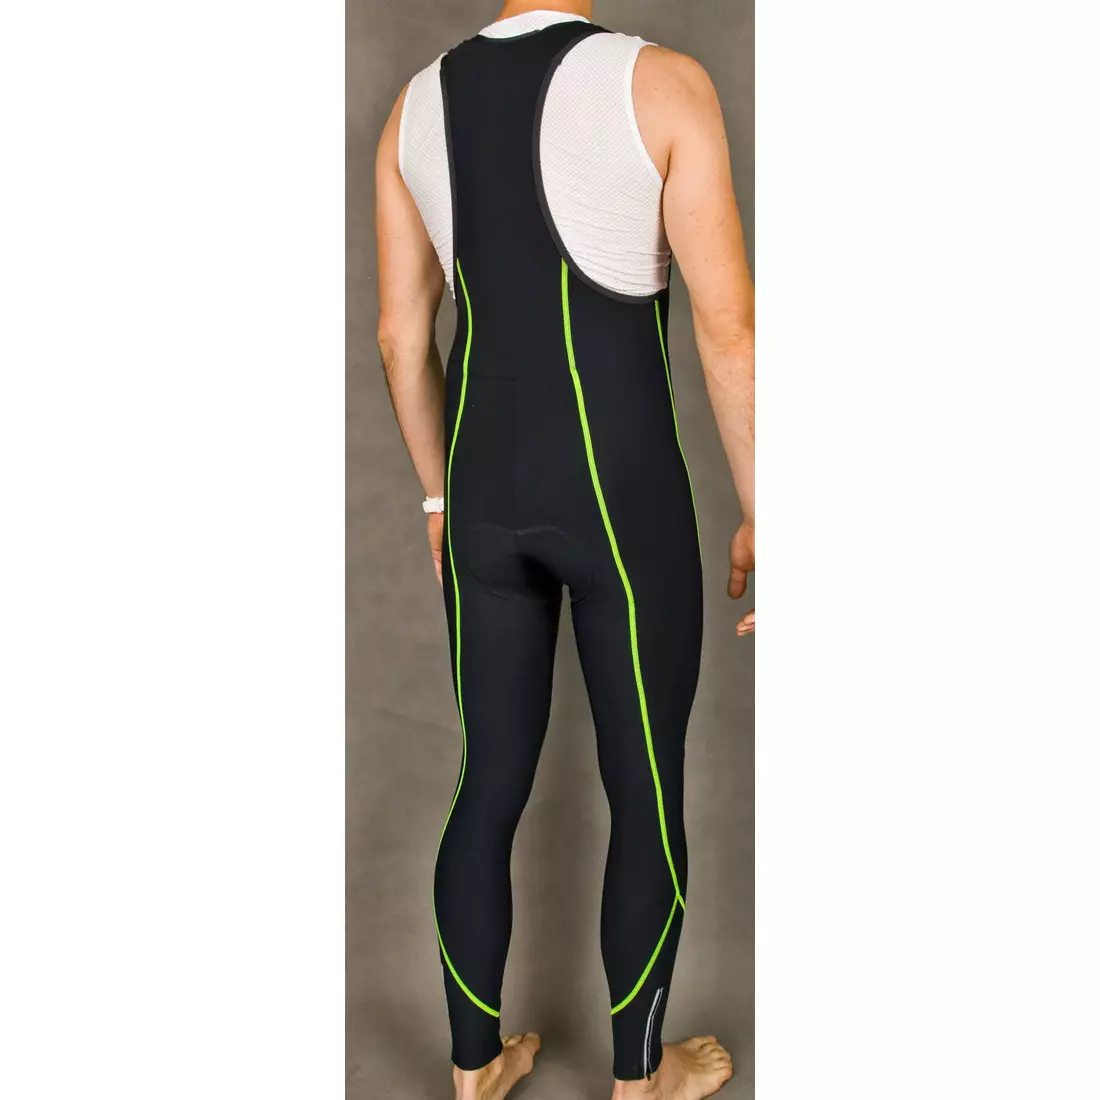 MikeSPORT GEXO insulated cycling pants with COMP HP insert, bib, black and fluorine stitching